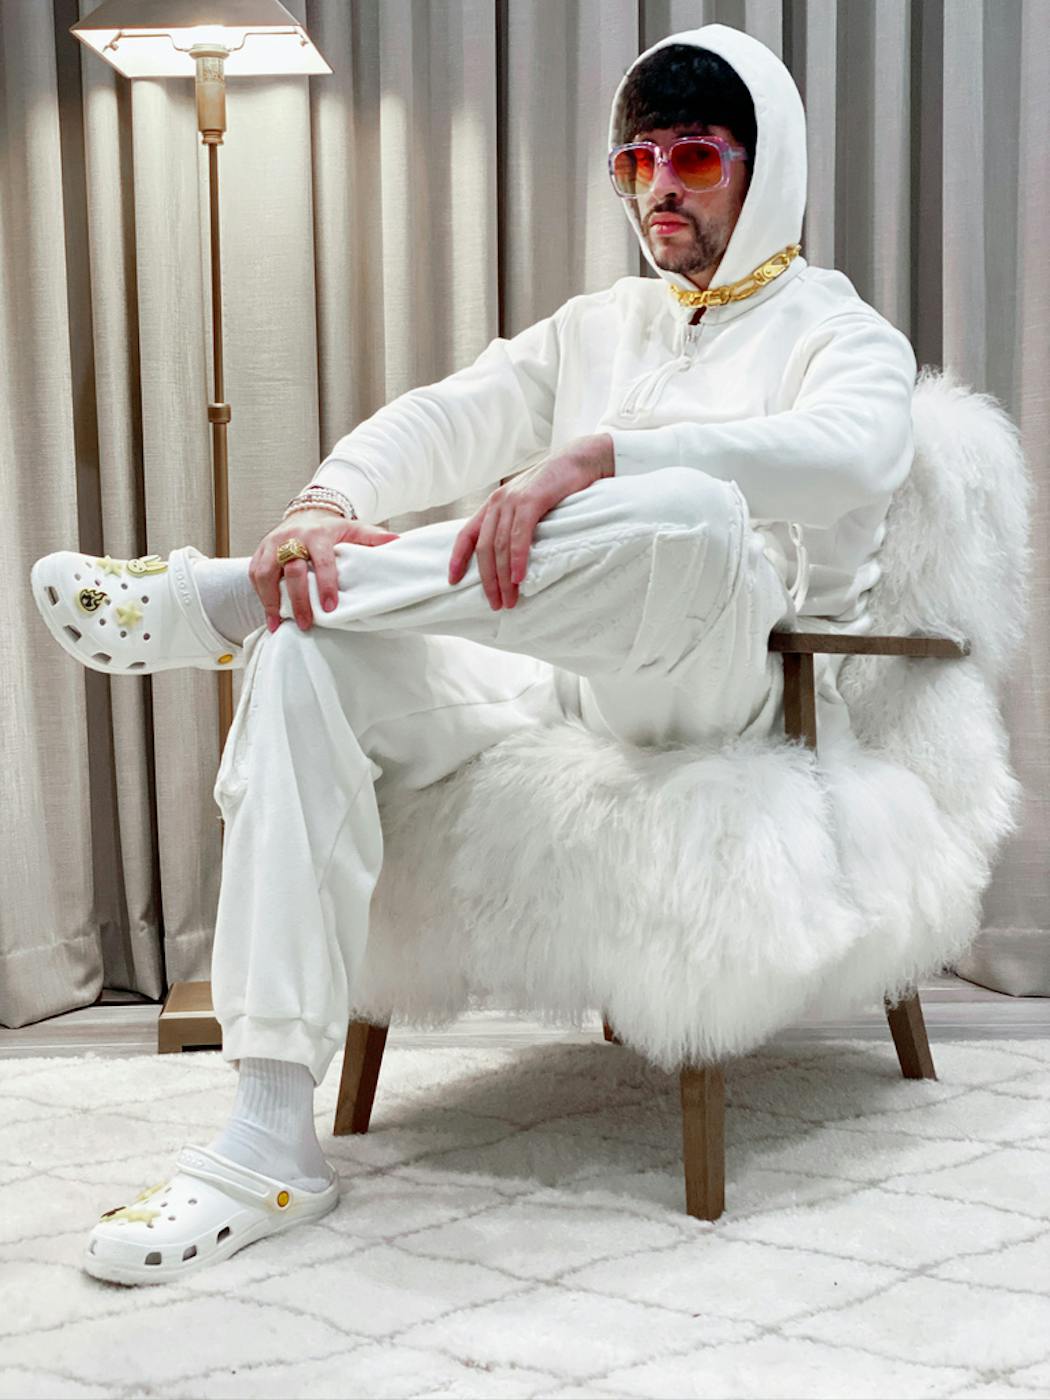 Bad Bunny in a promotional image for the sold-out Bad Bunny Crocs.